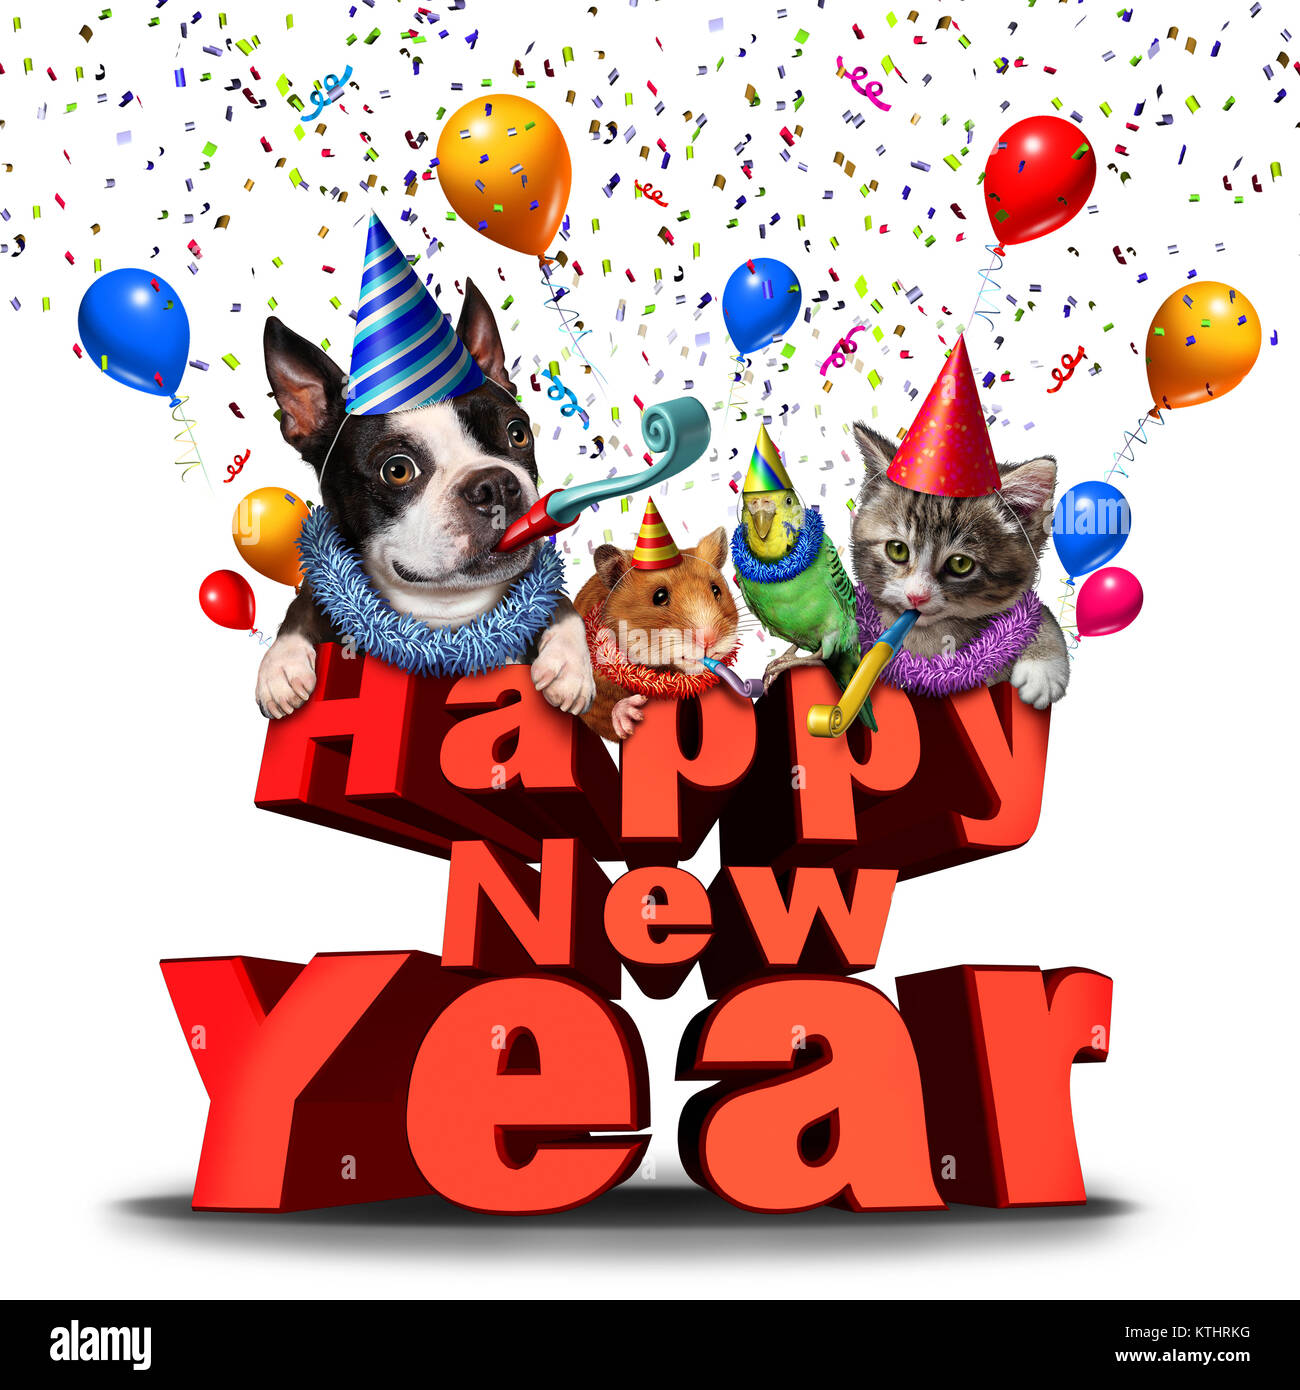 Happy New Year cute animals festive graphic element as a joyous celebration as adorable pets as a dog cat bird and hamster celebrating. Stock Photo